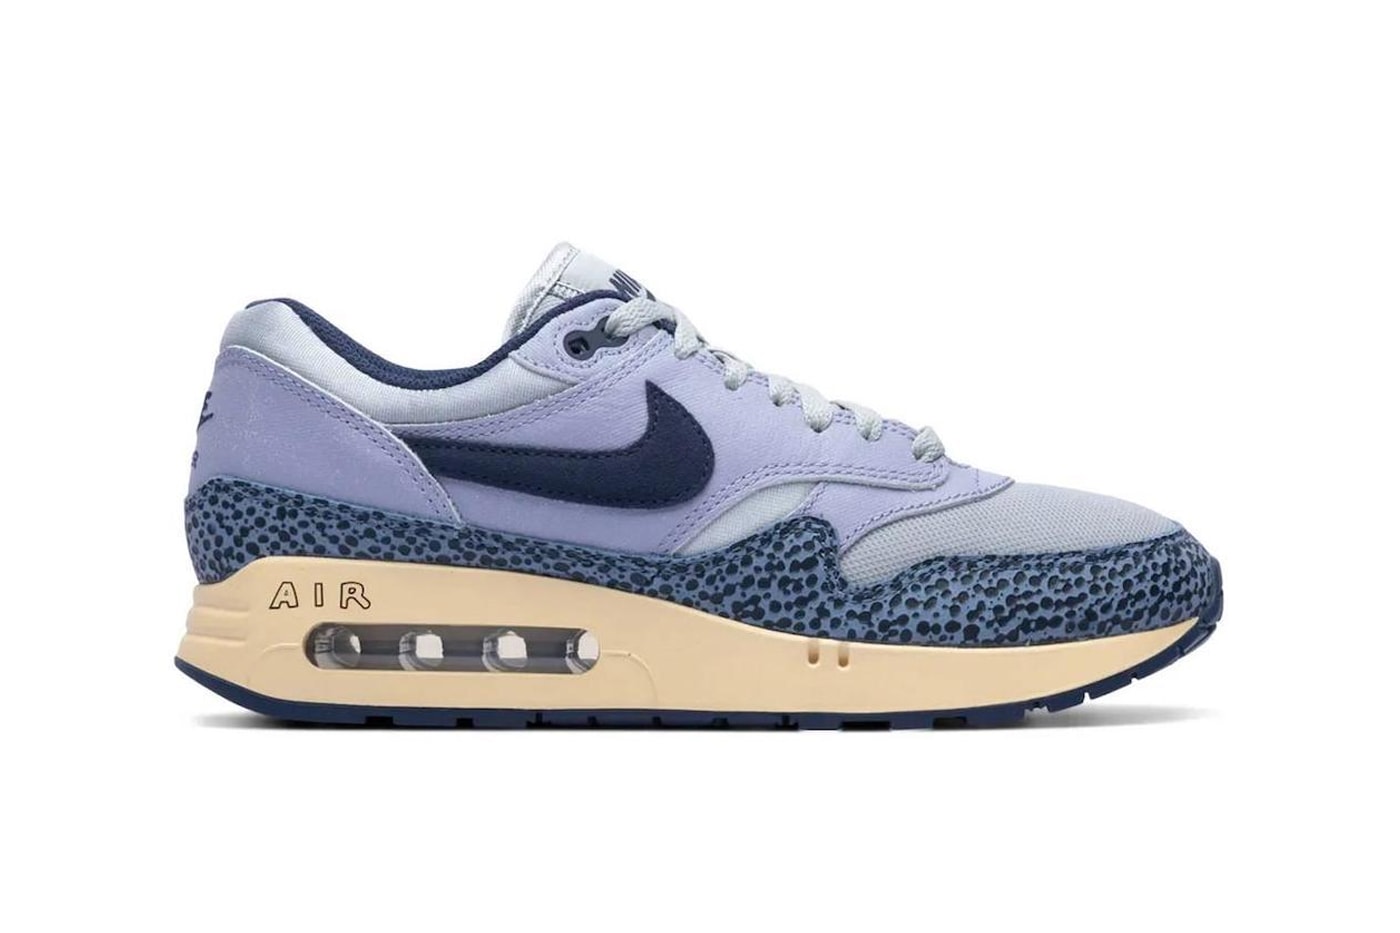 Light Navy Blue' Nike Air Max 1 'Big Bubble' Limited to 1,986 Pairs